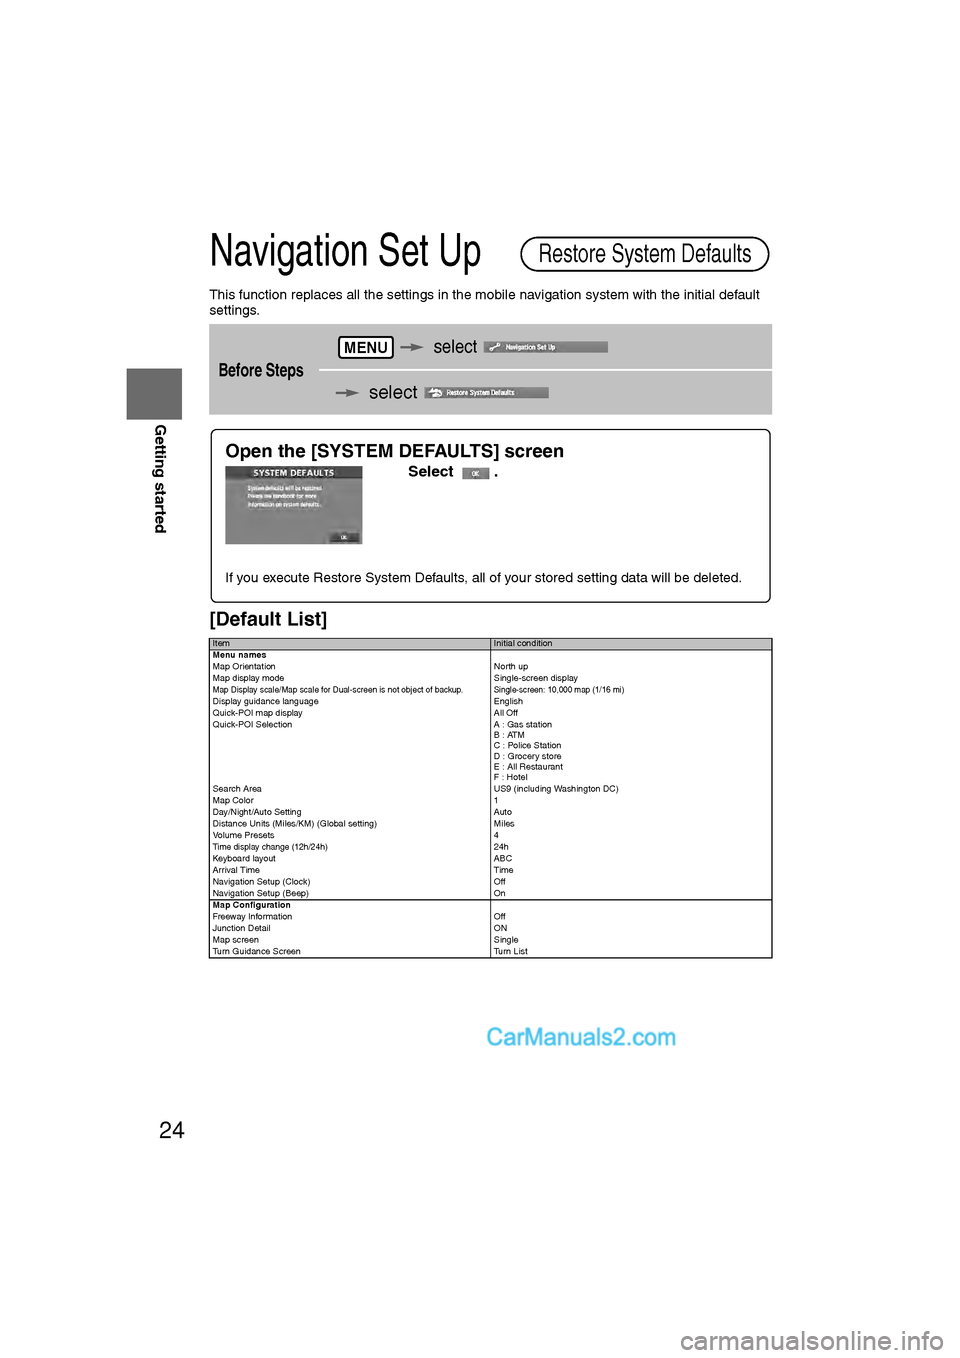 MAZDA MODEL CX-9 2008  Navigation Manual (in English) 24
RoutingAddress 
Book
Getting started
Navigation Set Up
This function replaces all the settings in the mobile navigation system with the initial default 
settings.
[Default List]
Before Steps
   sel